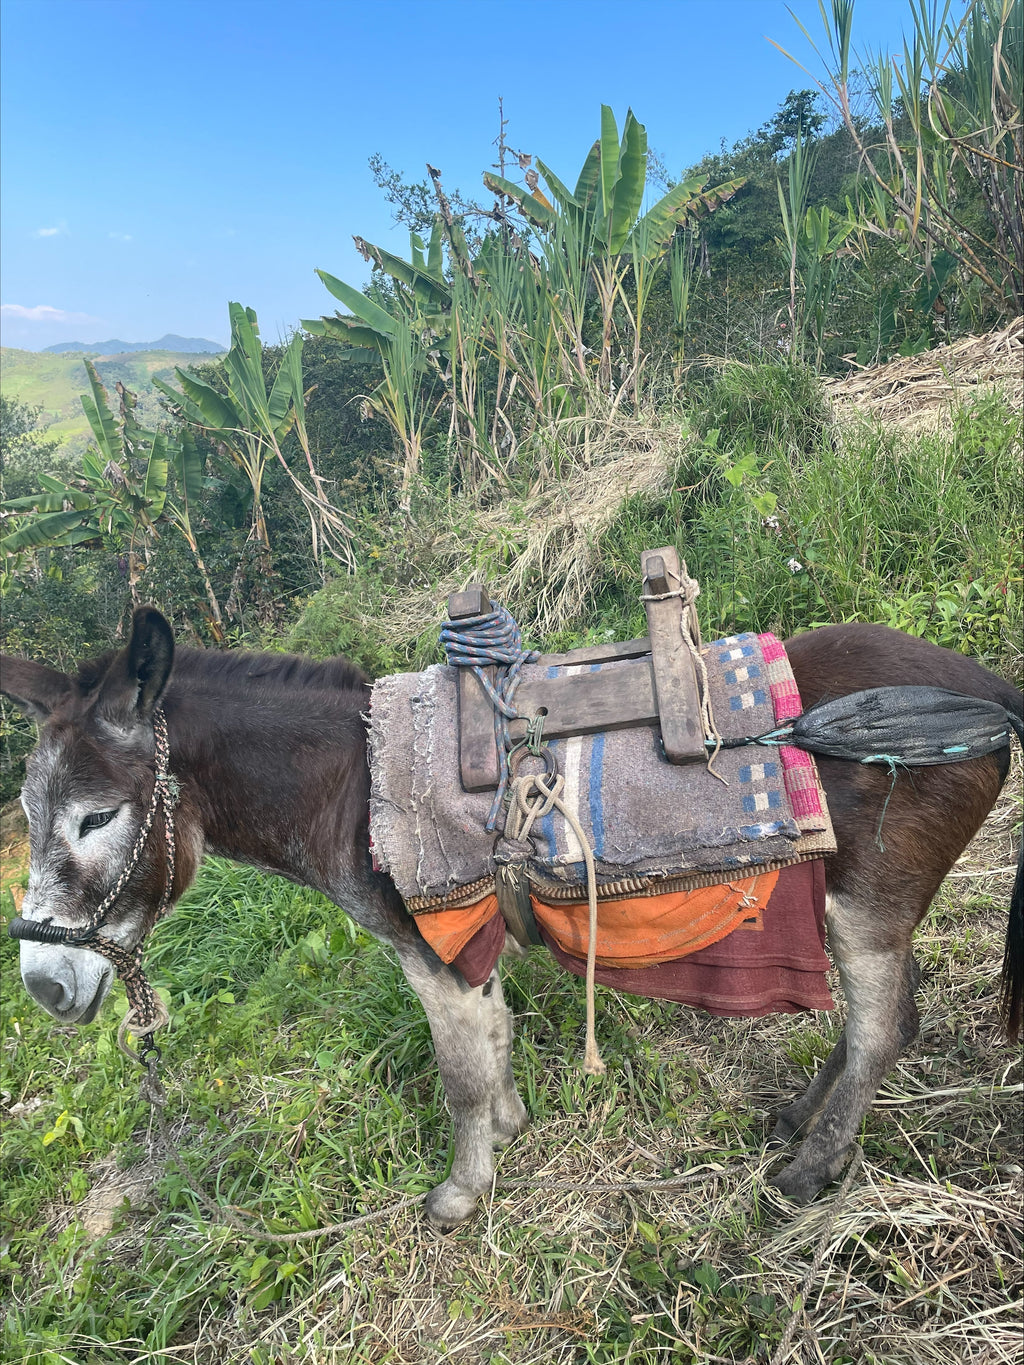 Eyner's donkey who helps transport most of the picked coffee cherries from El Cedro